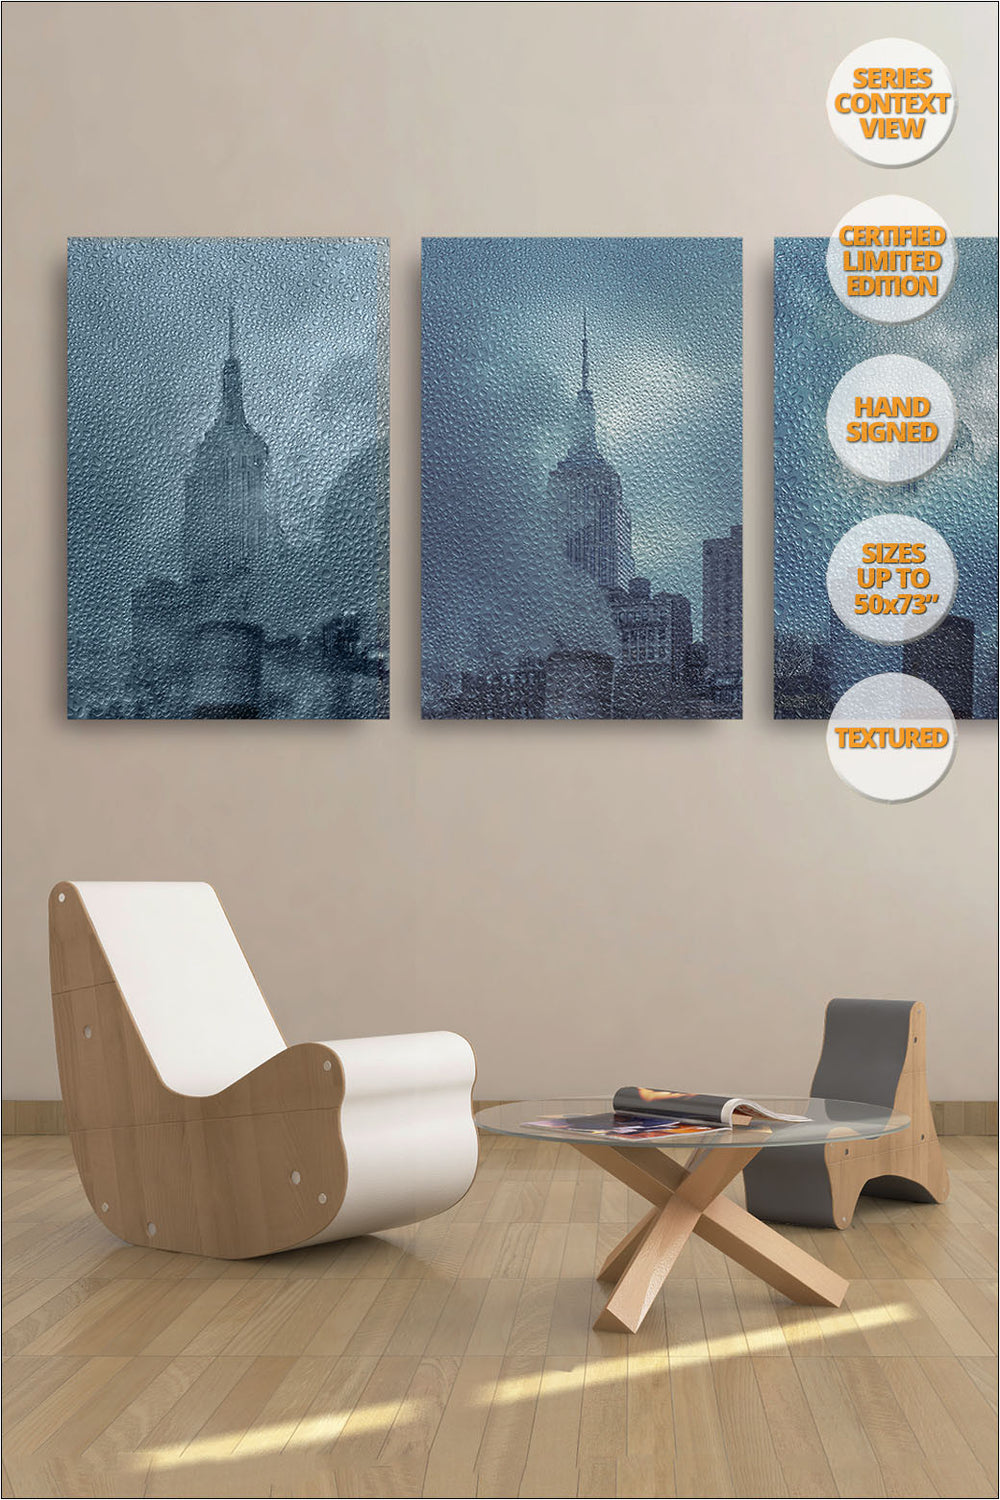 Empire State under the Rain, New York. Series 1/4. | Series hanged in living room.